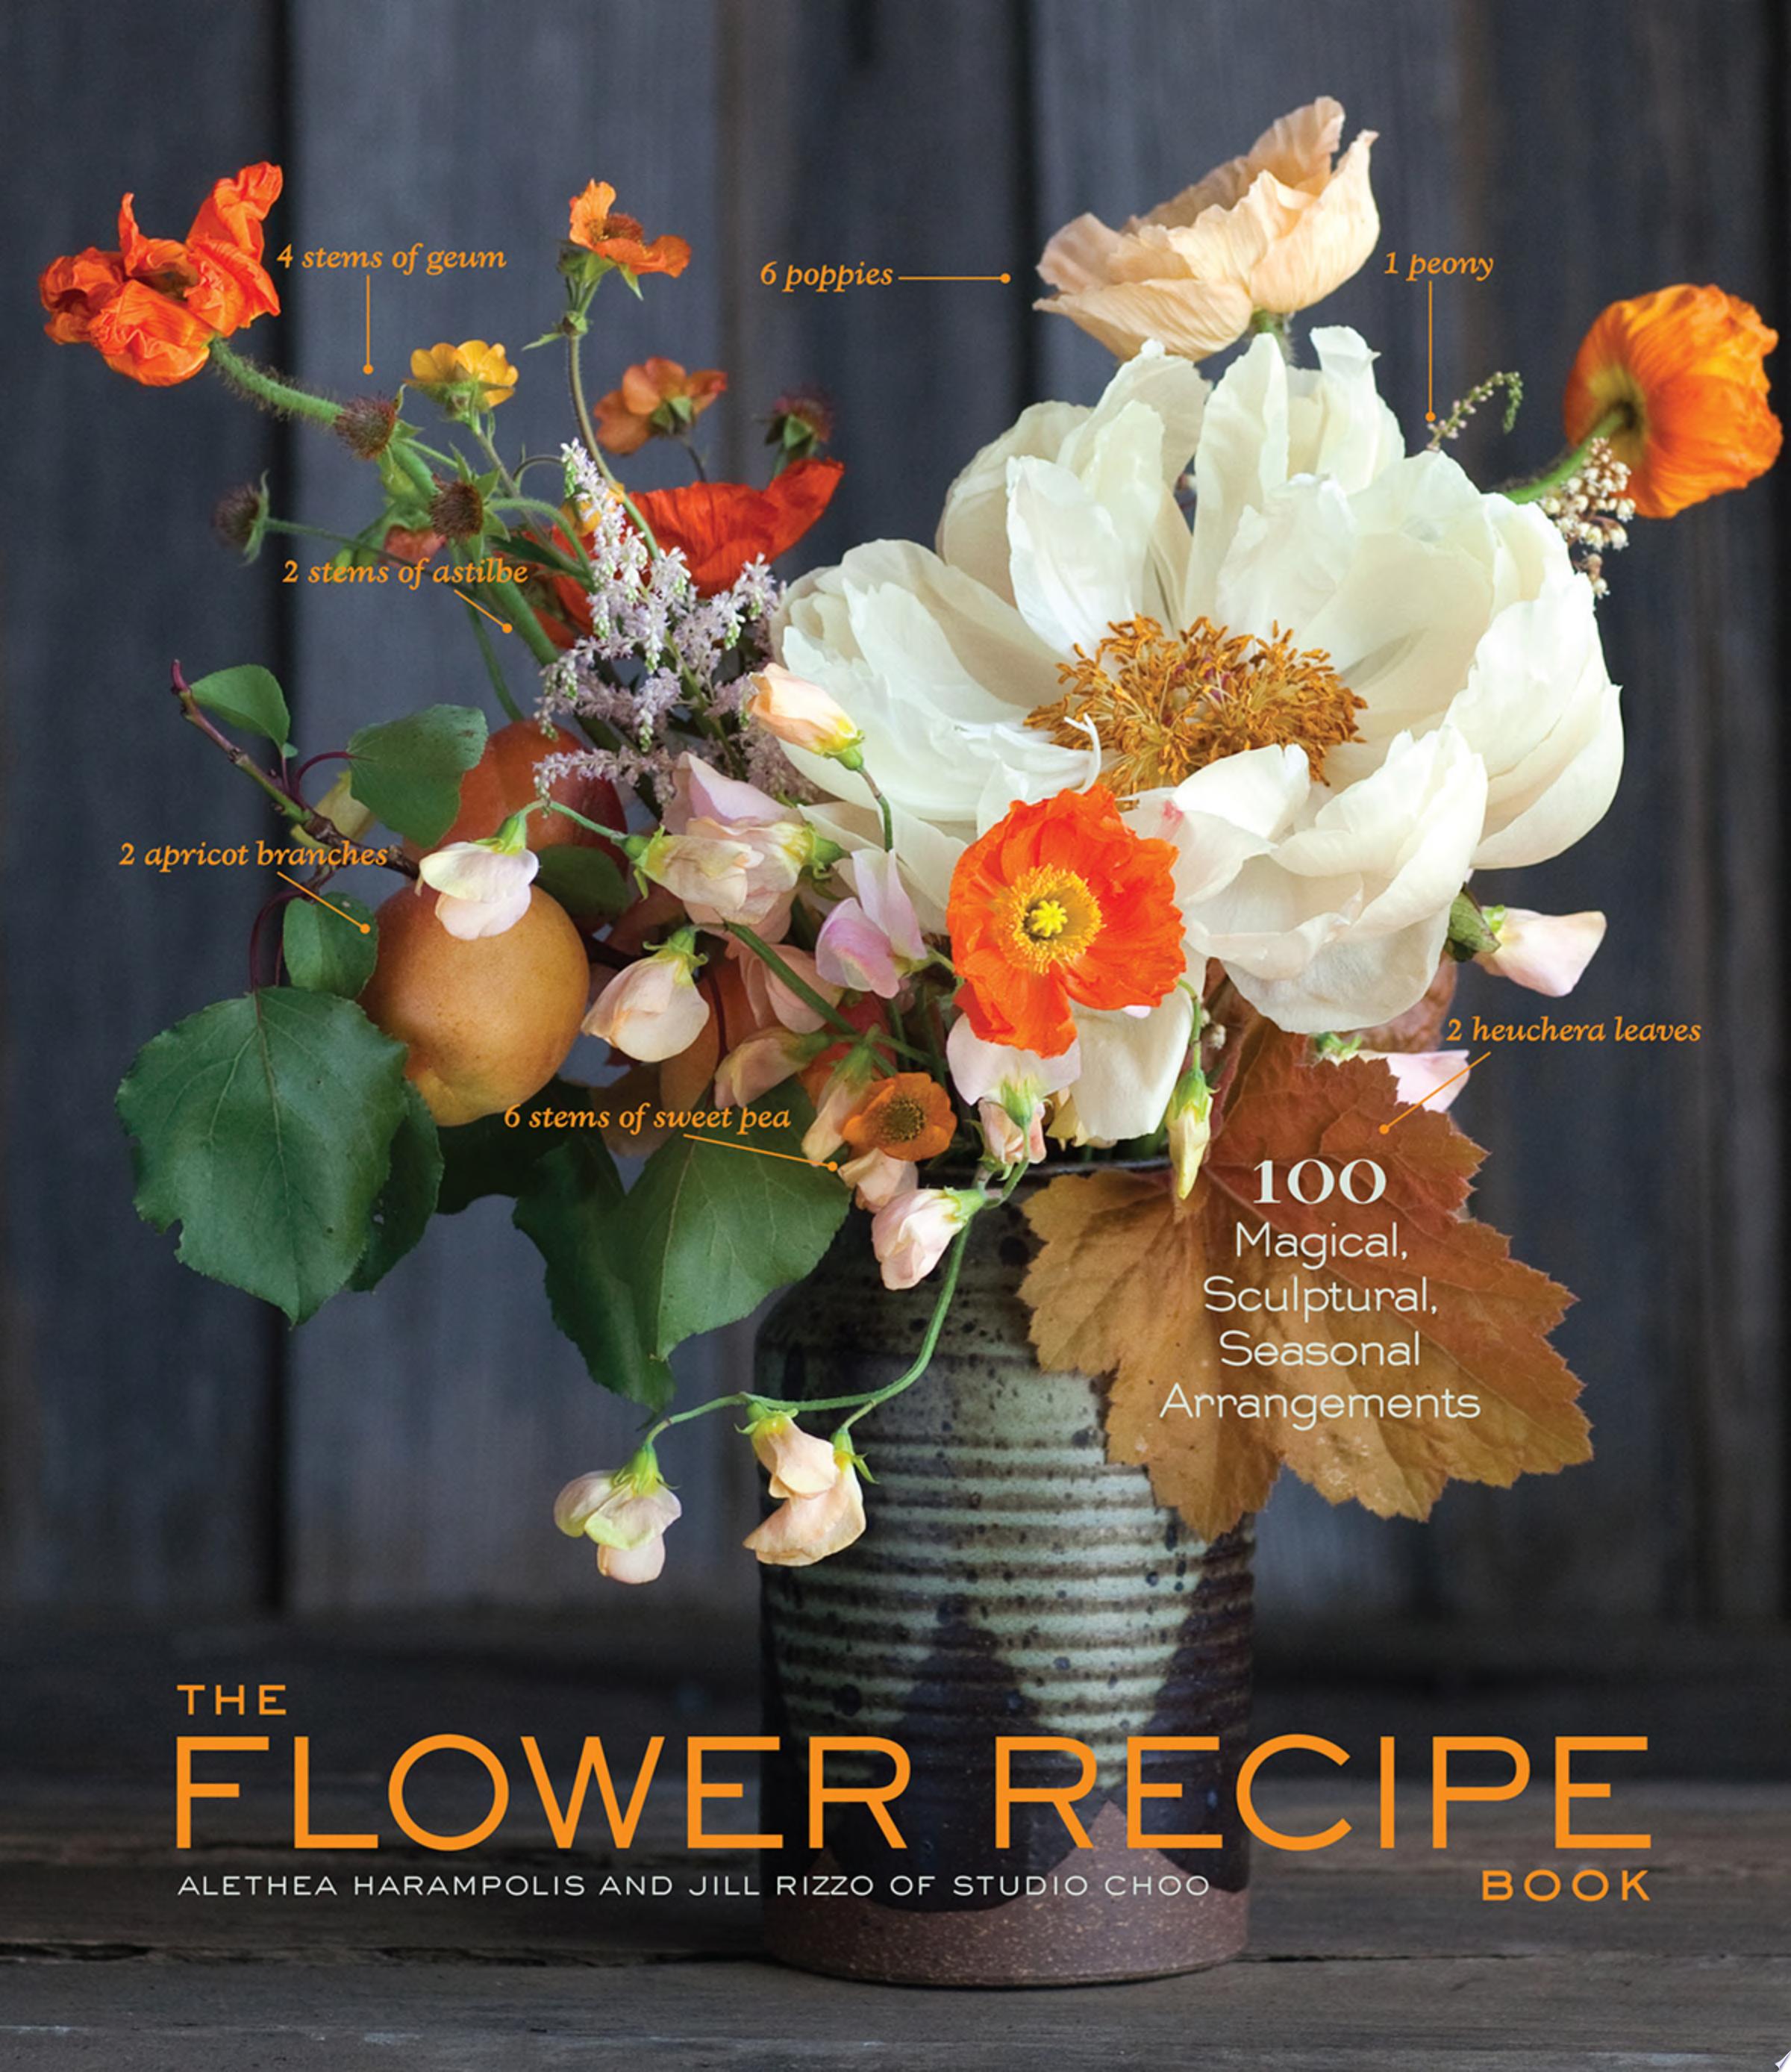 Image for "The Flower Recipe Book"